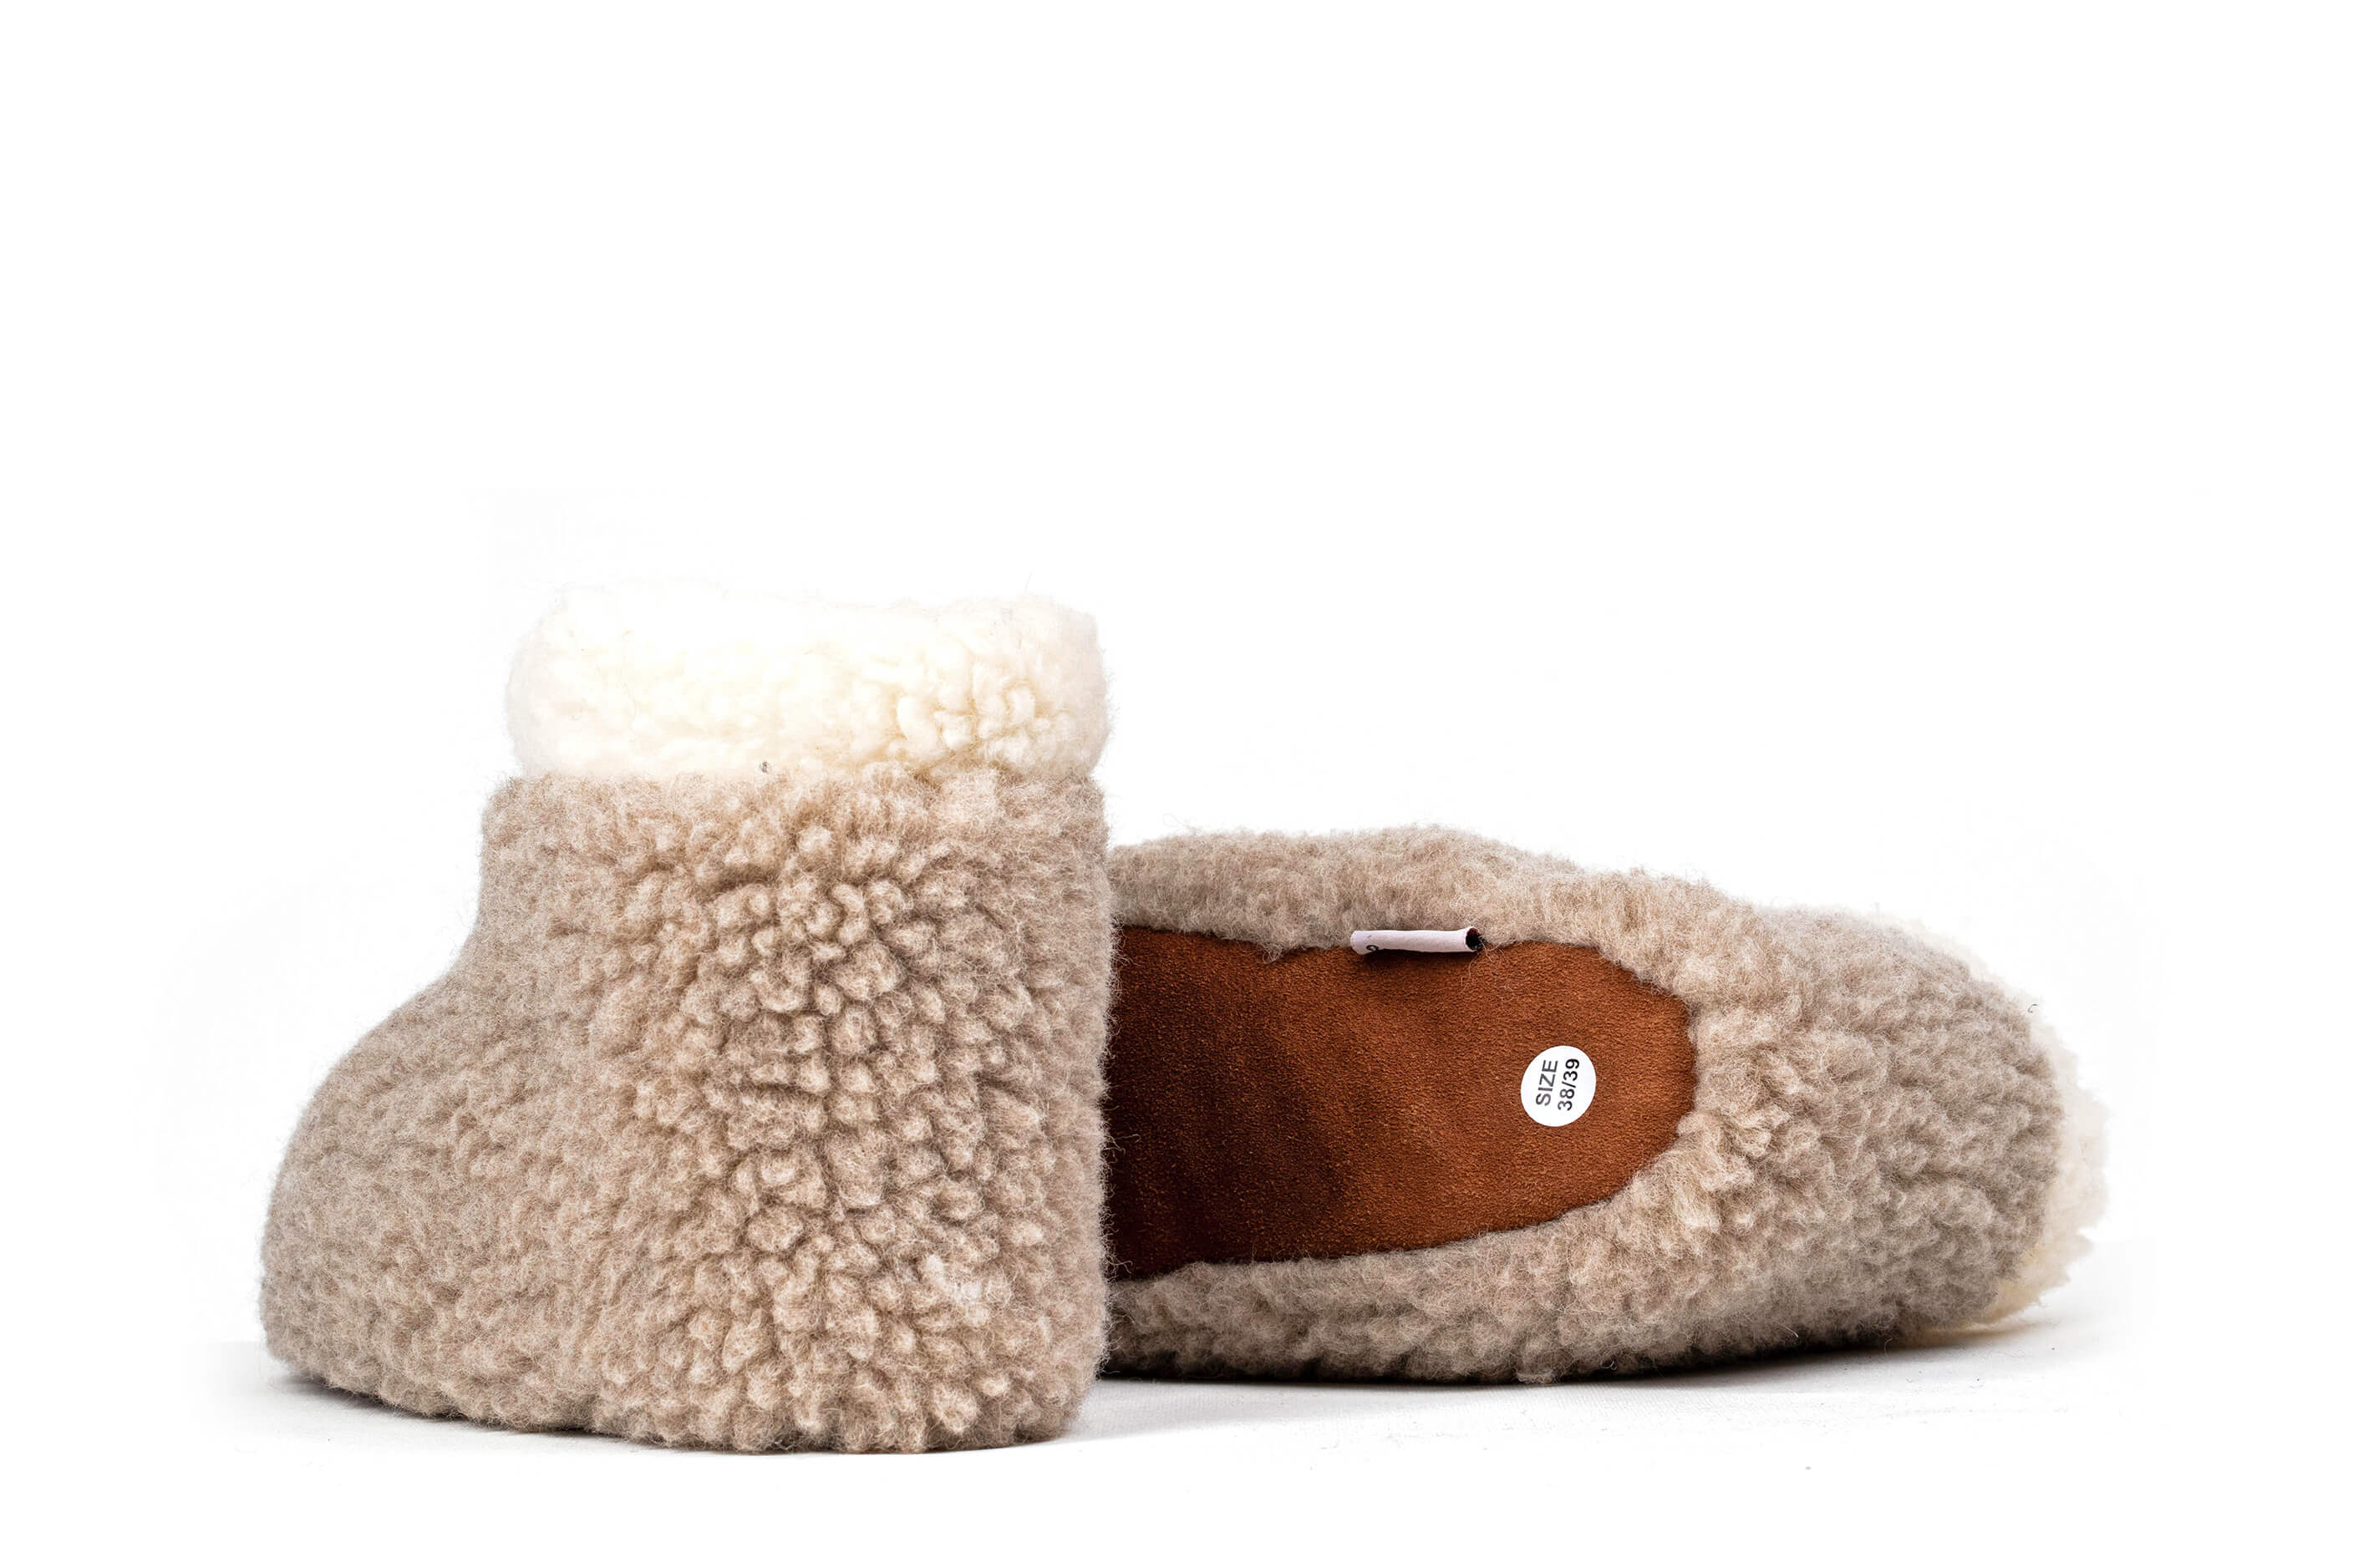 Sherpa Woollen Boots - Inside White /Out Side Light Brown